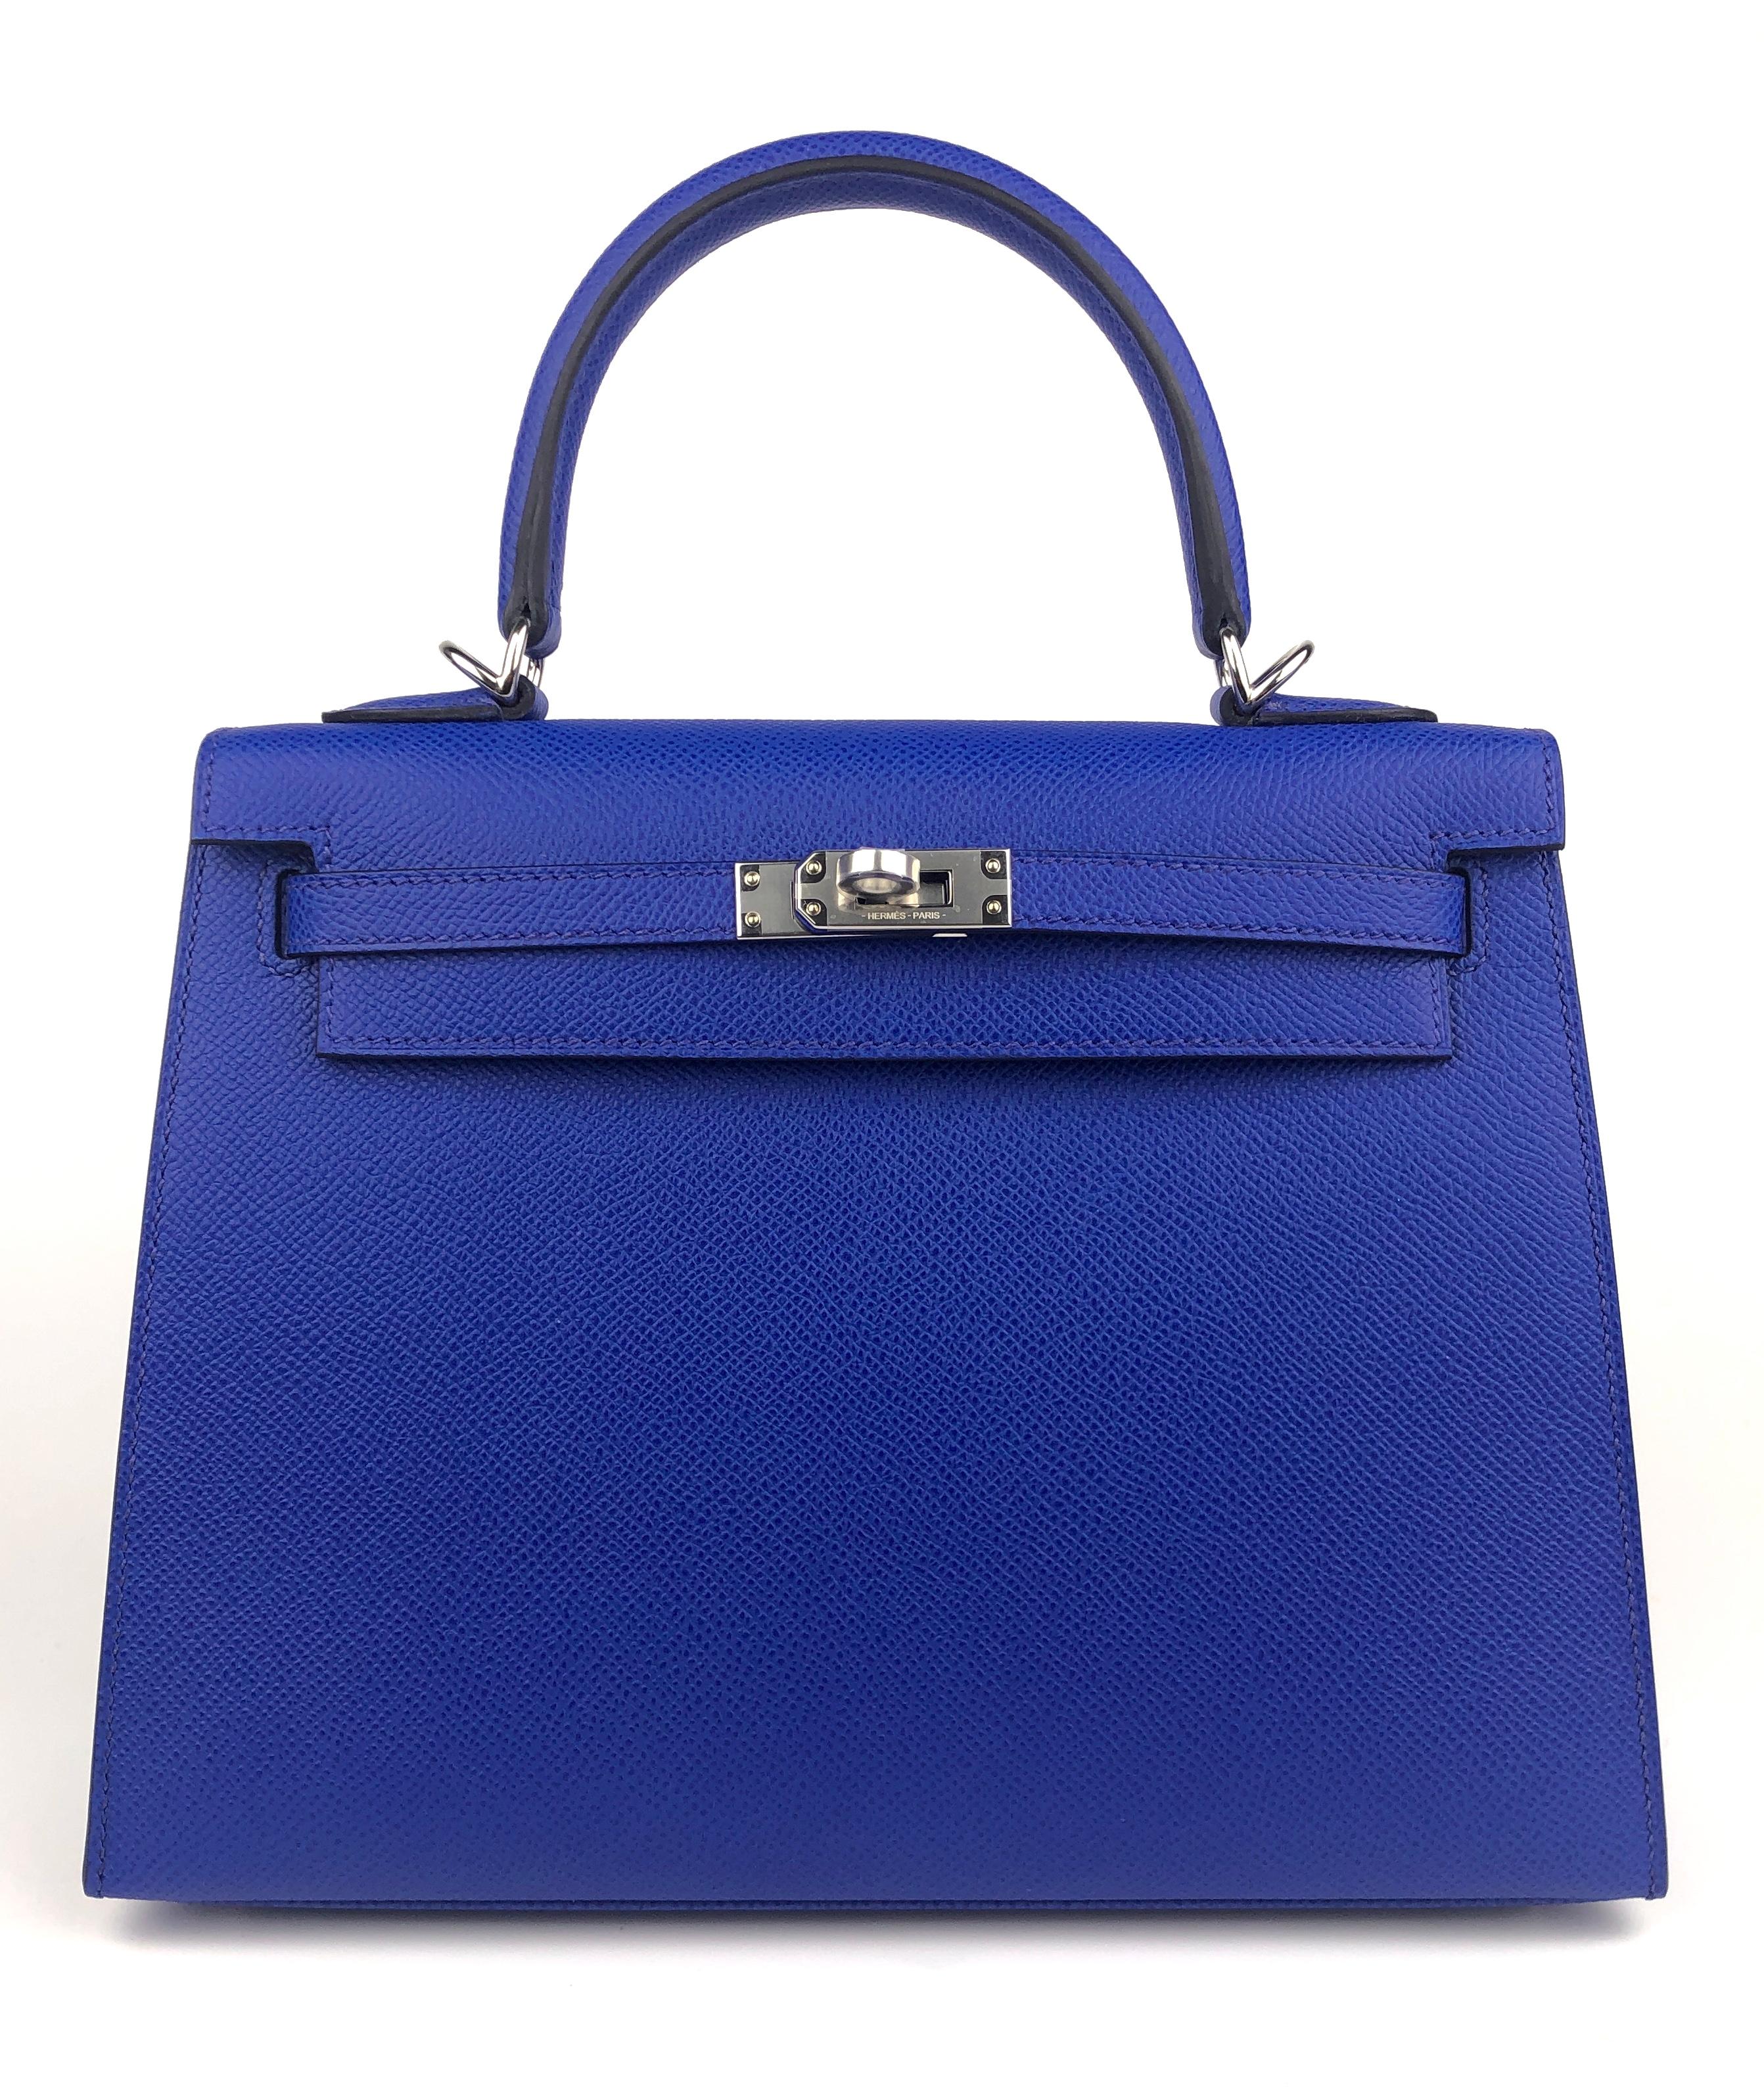 Stunning Very Rare Brand New 2022 Hermes Kelly 25 Sellier Blue Royal Epsom Leather Palladium Hardware. ONLY ONE FOR SALE ON THE MARKET. U Stamp 2022.

Shop with Confidence from Lux Addicts. Authenticity Guaranteed! 